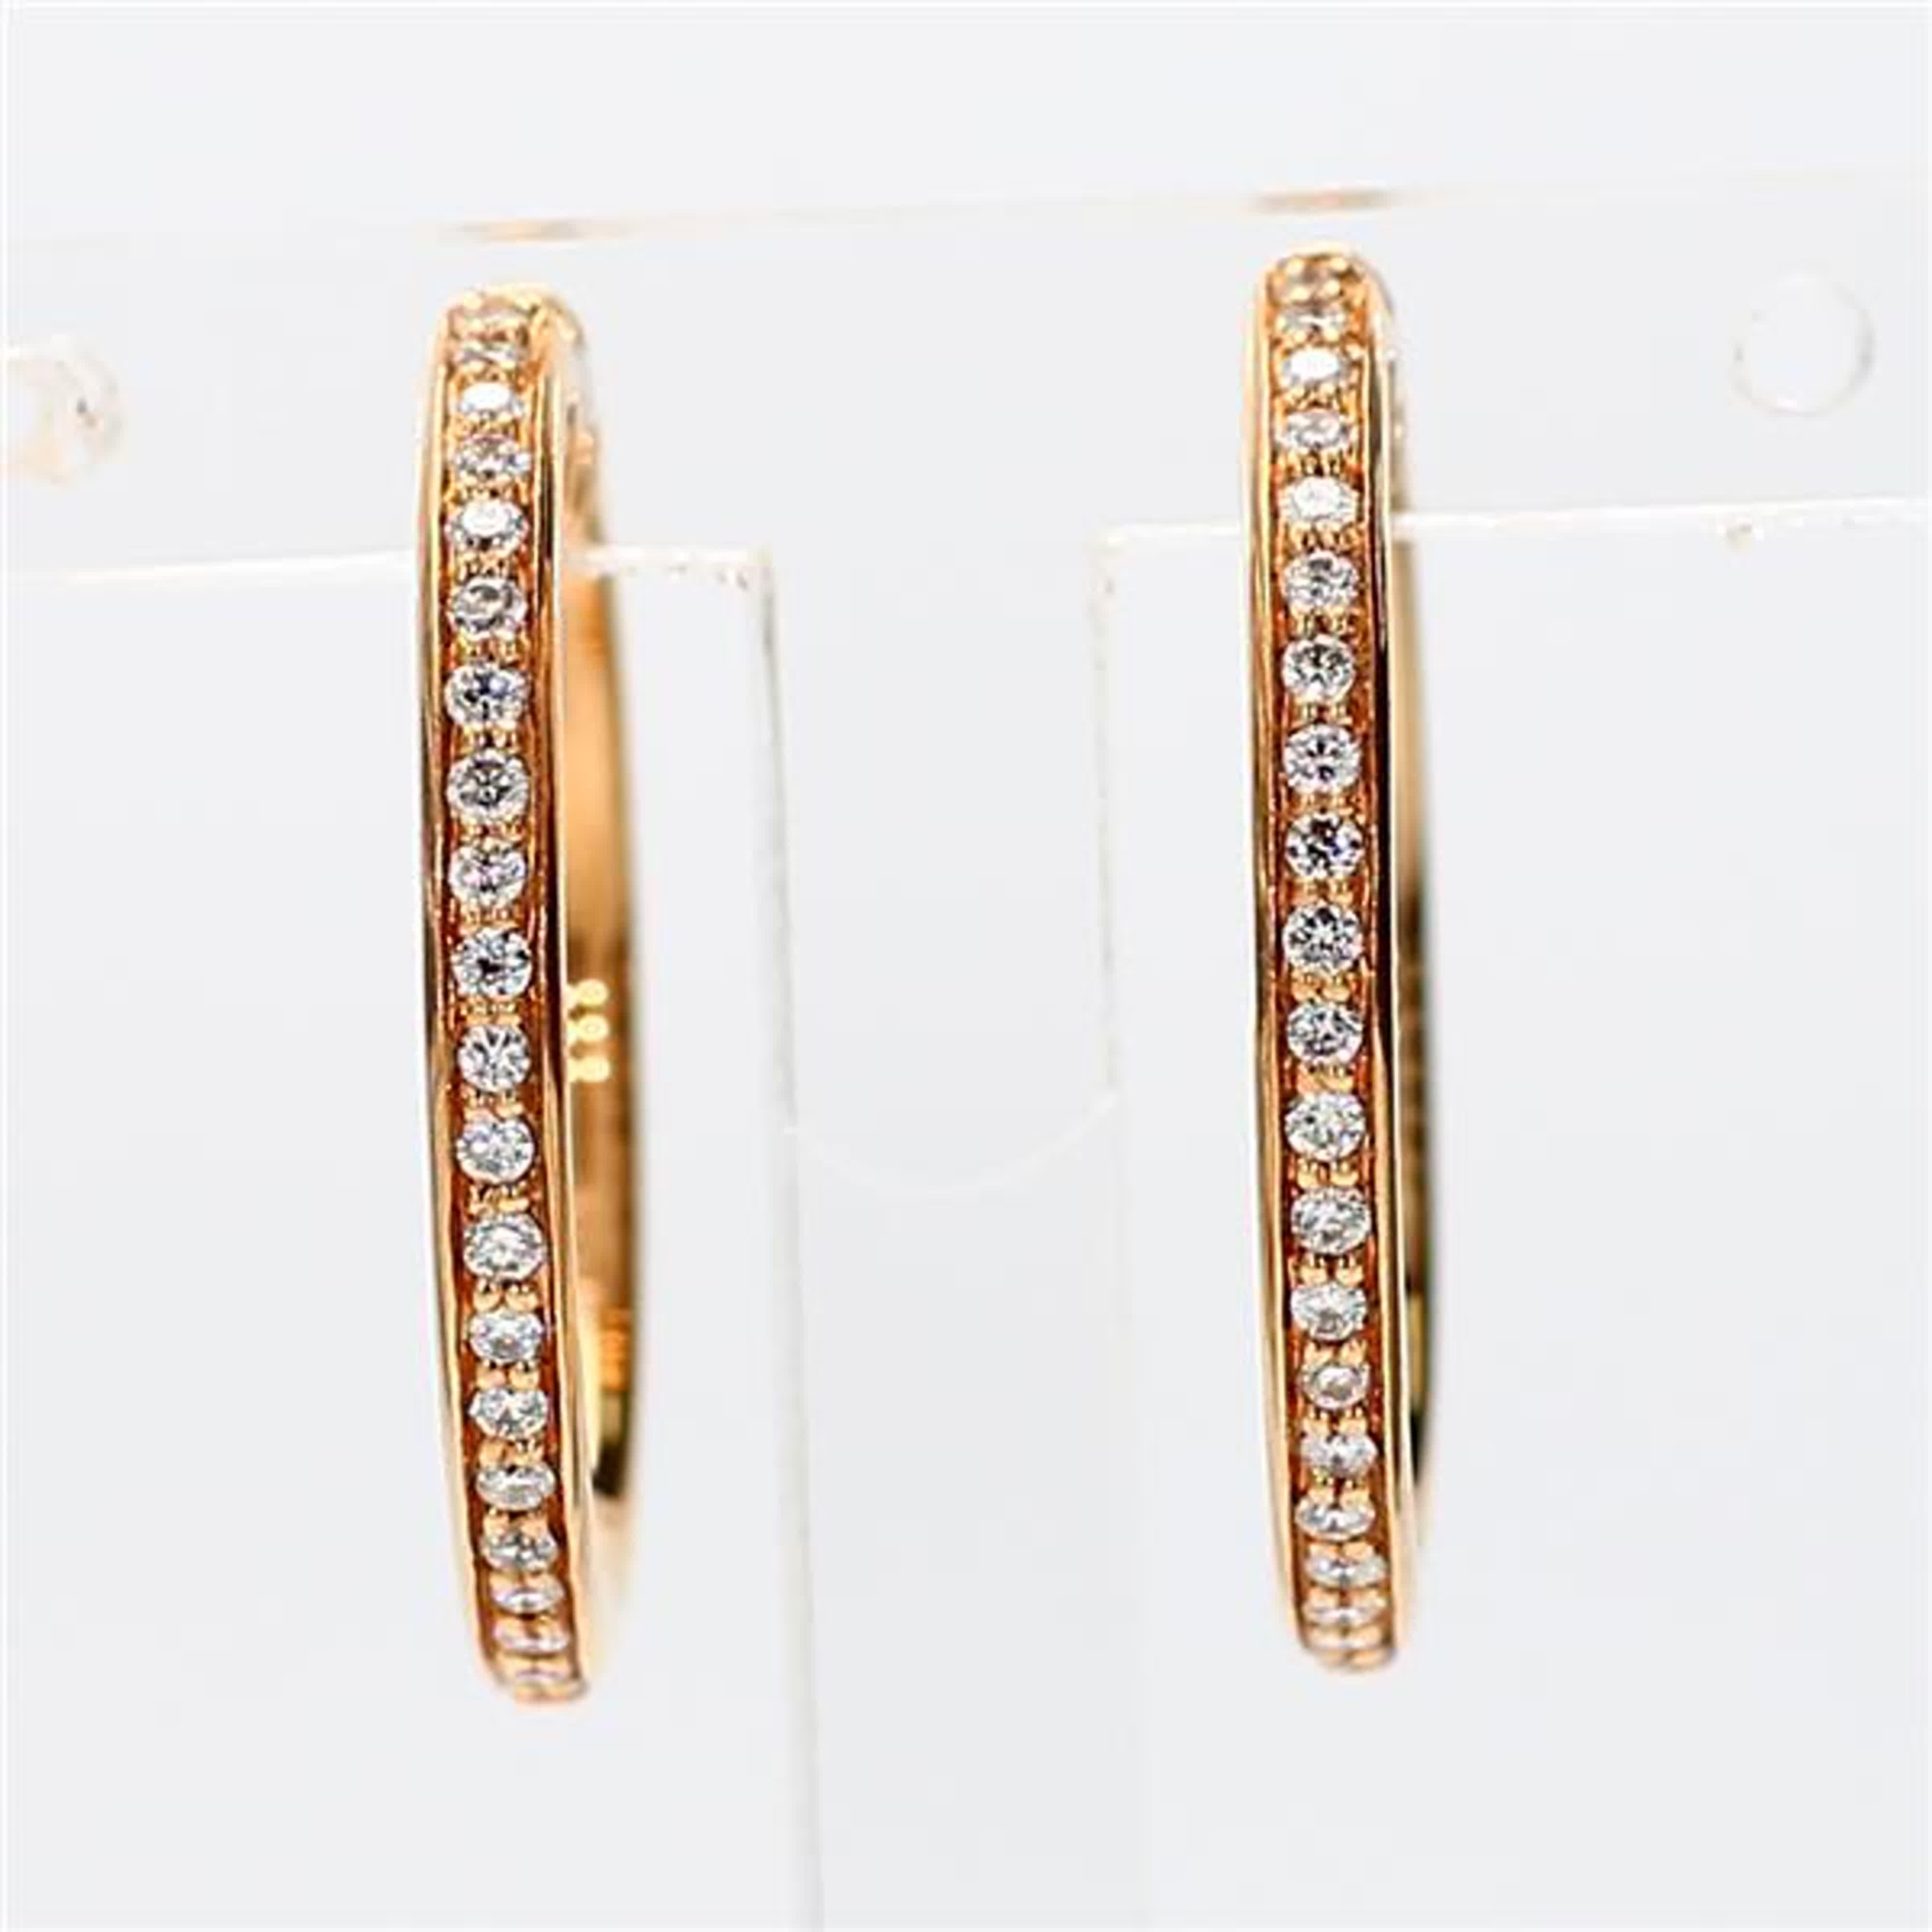 RareGemWorld's classic natural round cut white diamond earrings. Mounted in a beautiful 18K Yellow Gold setting with natural round cut white diamond melee along the hoop. These earrings are guaranteed to impress and enhance your personal